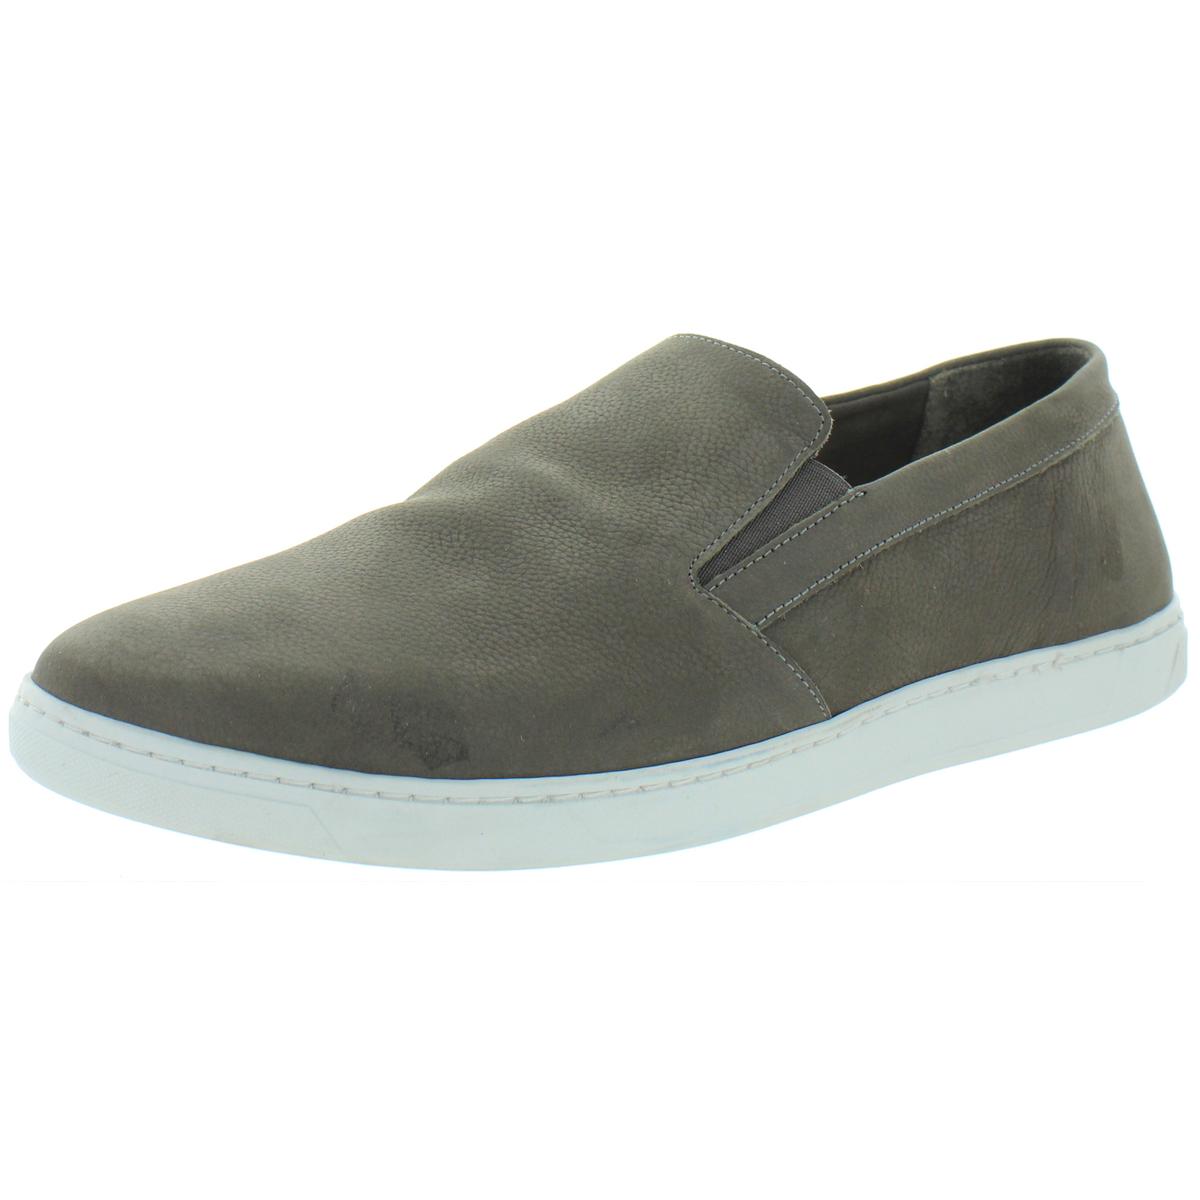 Vince Camuto Mens Neff Nubuck Slip On Comfort Smoking Loafers Shoes ...